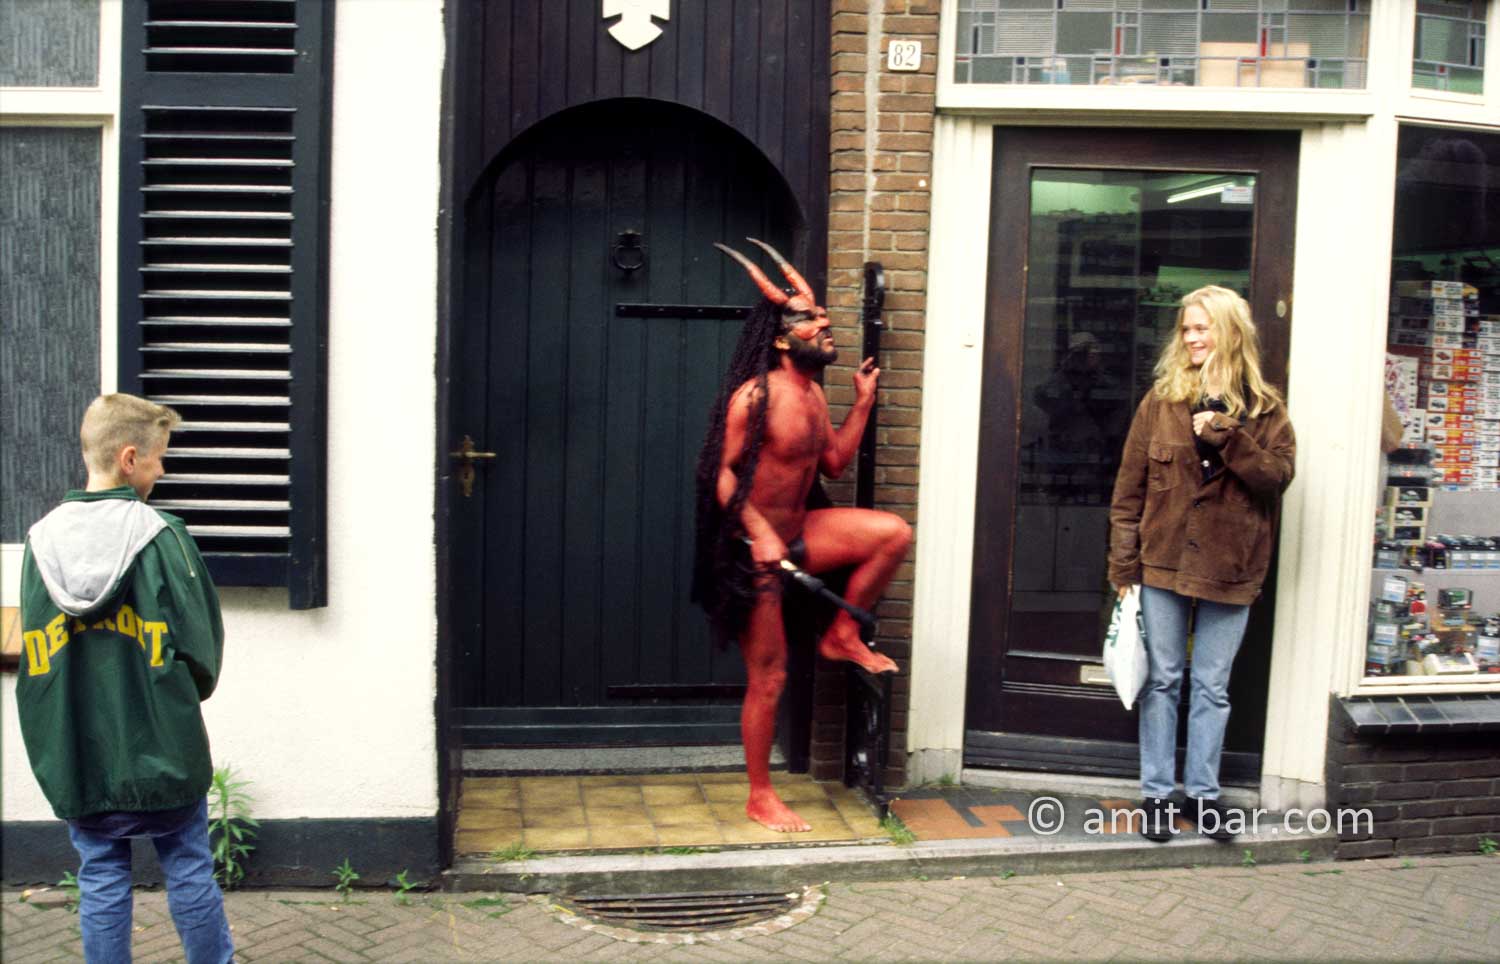 Who's afraid of the devil I: An actor dressed as a devil is chasing a girl on street theater festival in Doetinchem, The Netheralnds